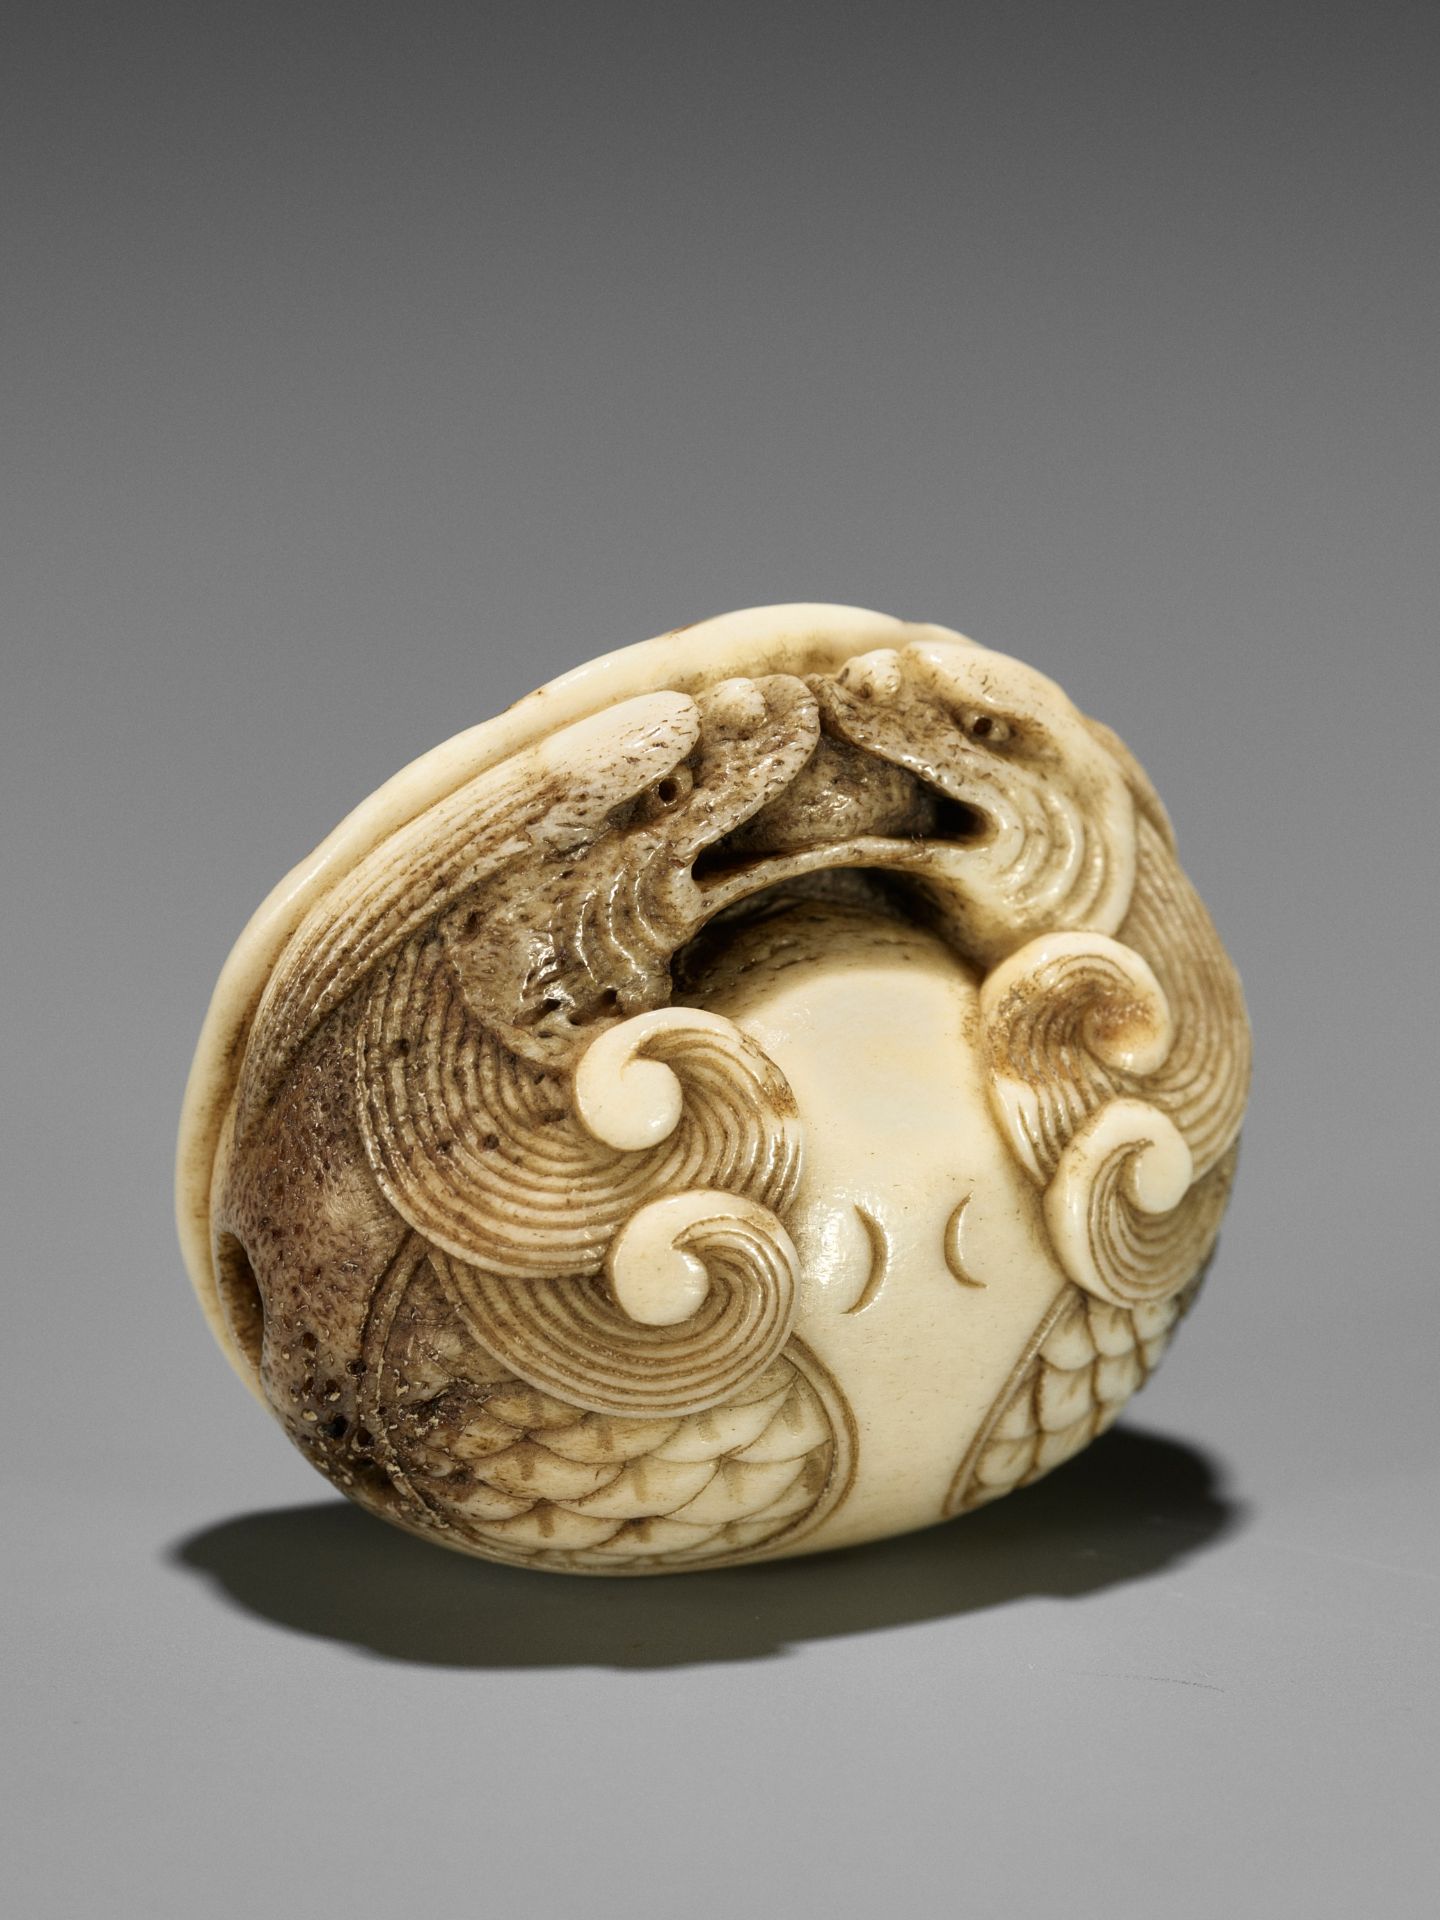 A FINE STAG ANTLER NETSUKE OF A DOUBLE DRAGON-HEADED MOKUGYO - Image 2 of 11